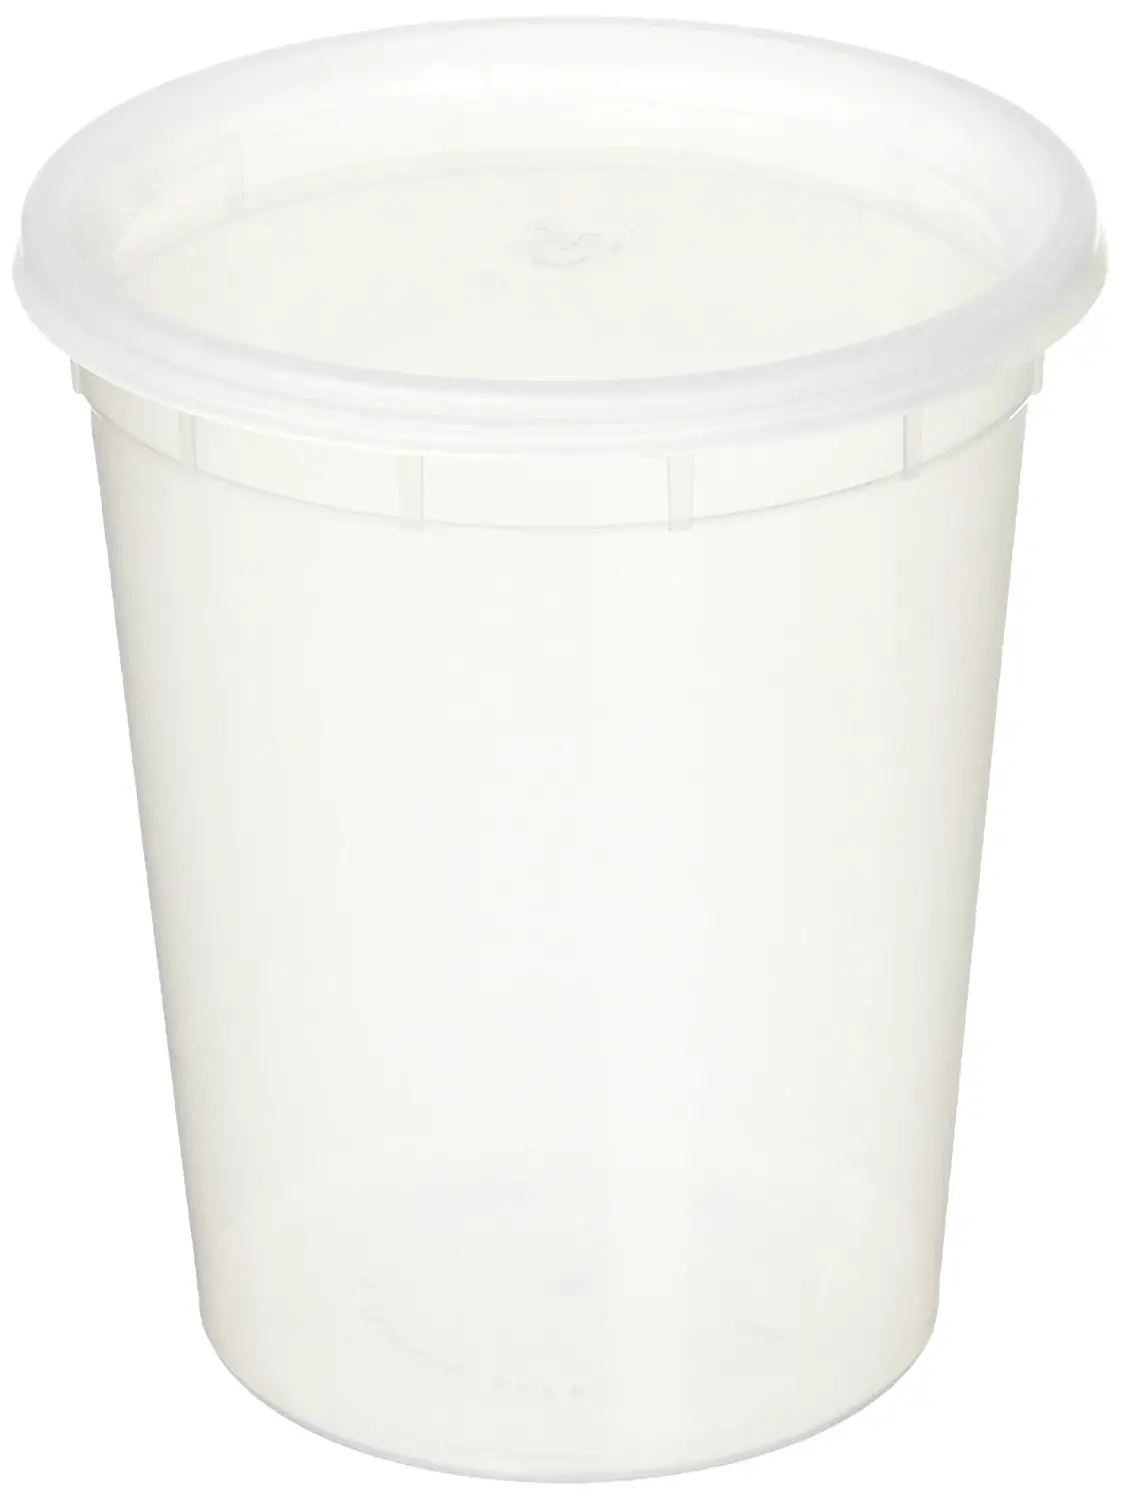 32oz plastic soup/Food container with lids 50 Pack